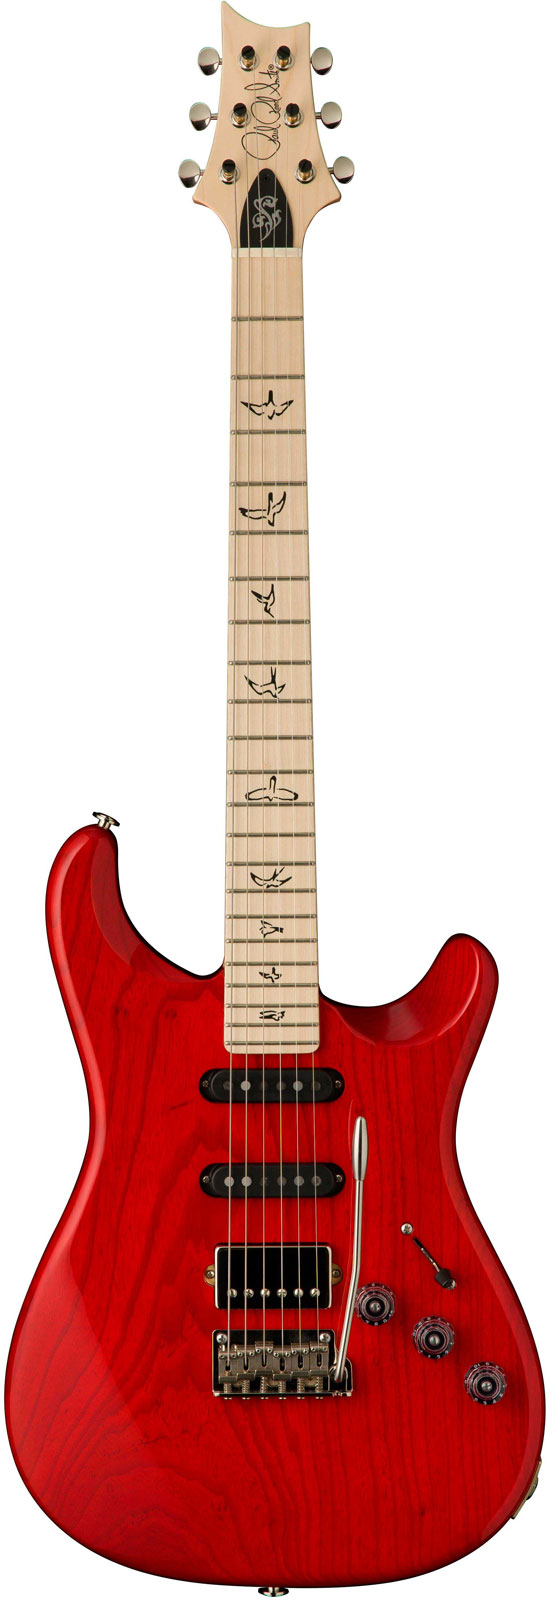 PRS - PAUL REED SMITH FIORE AMARYLISS